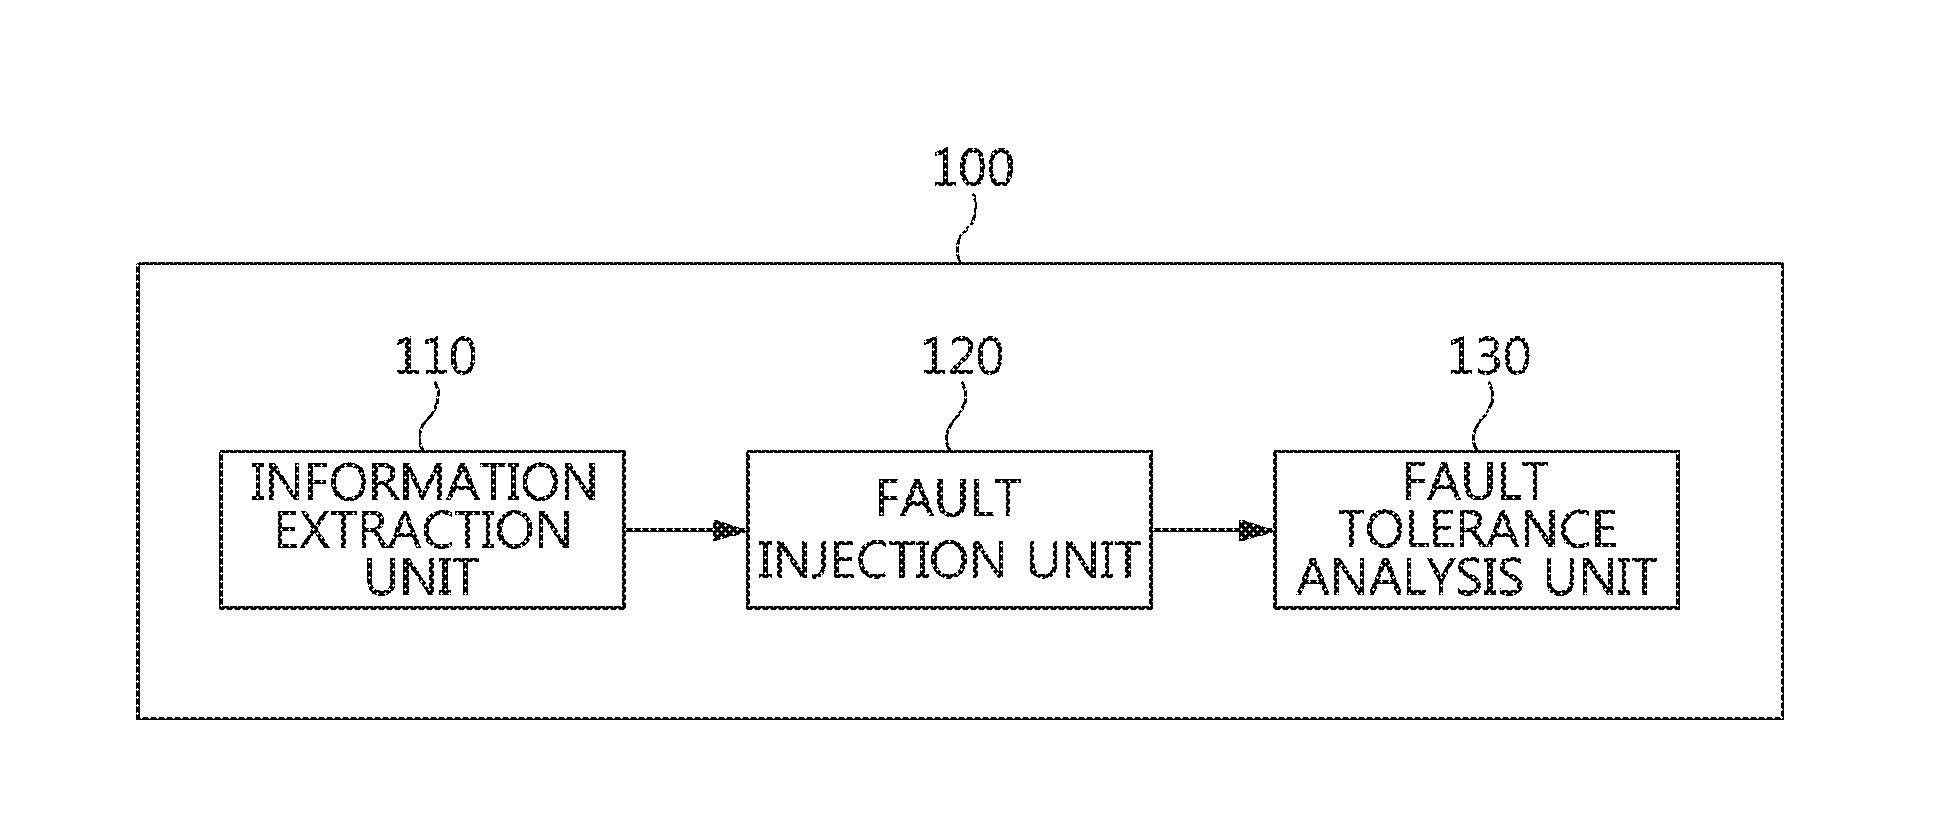 Method and apparatus for injecting fault and analyzing fault tolerance